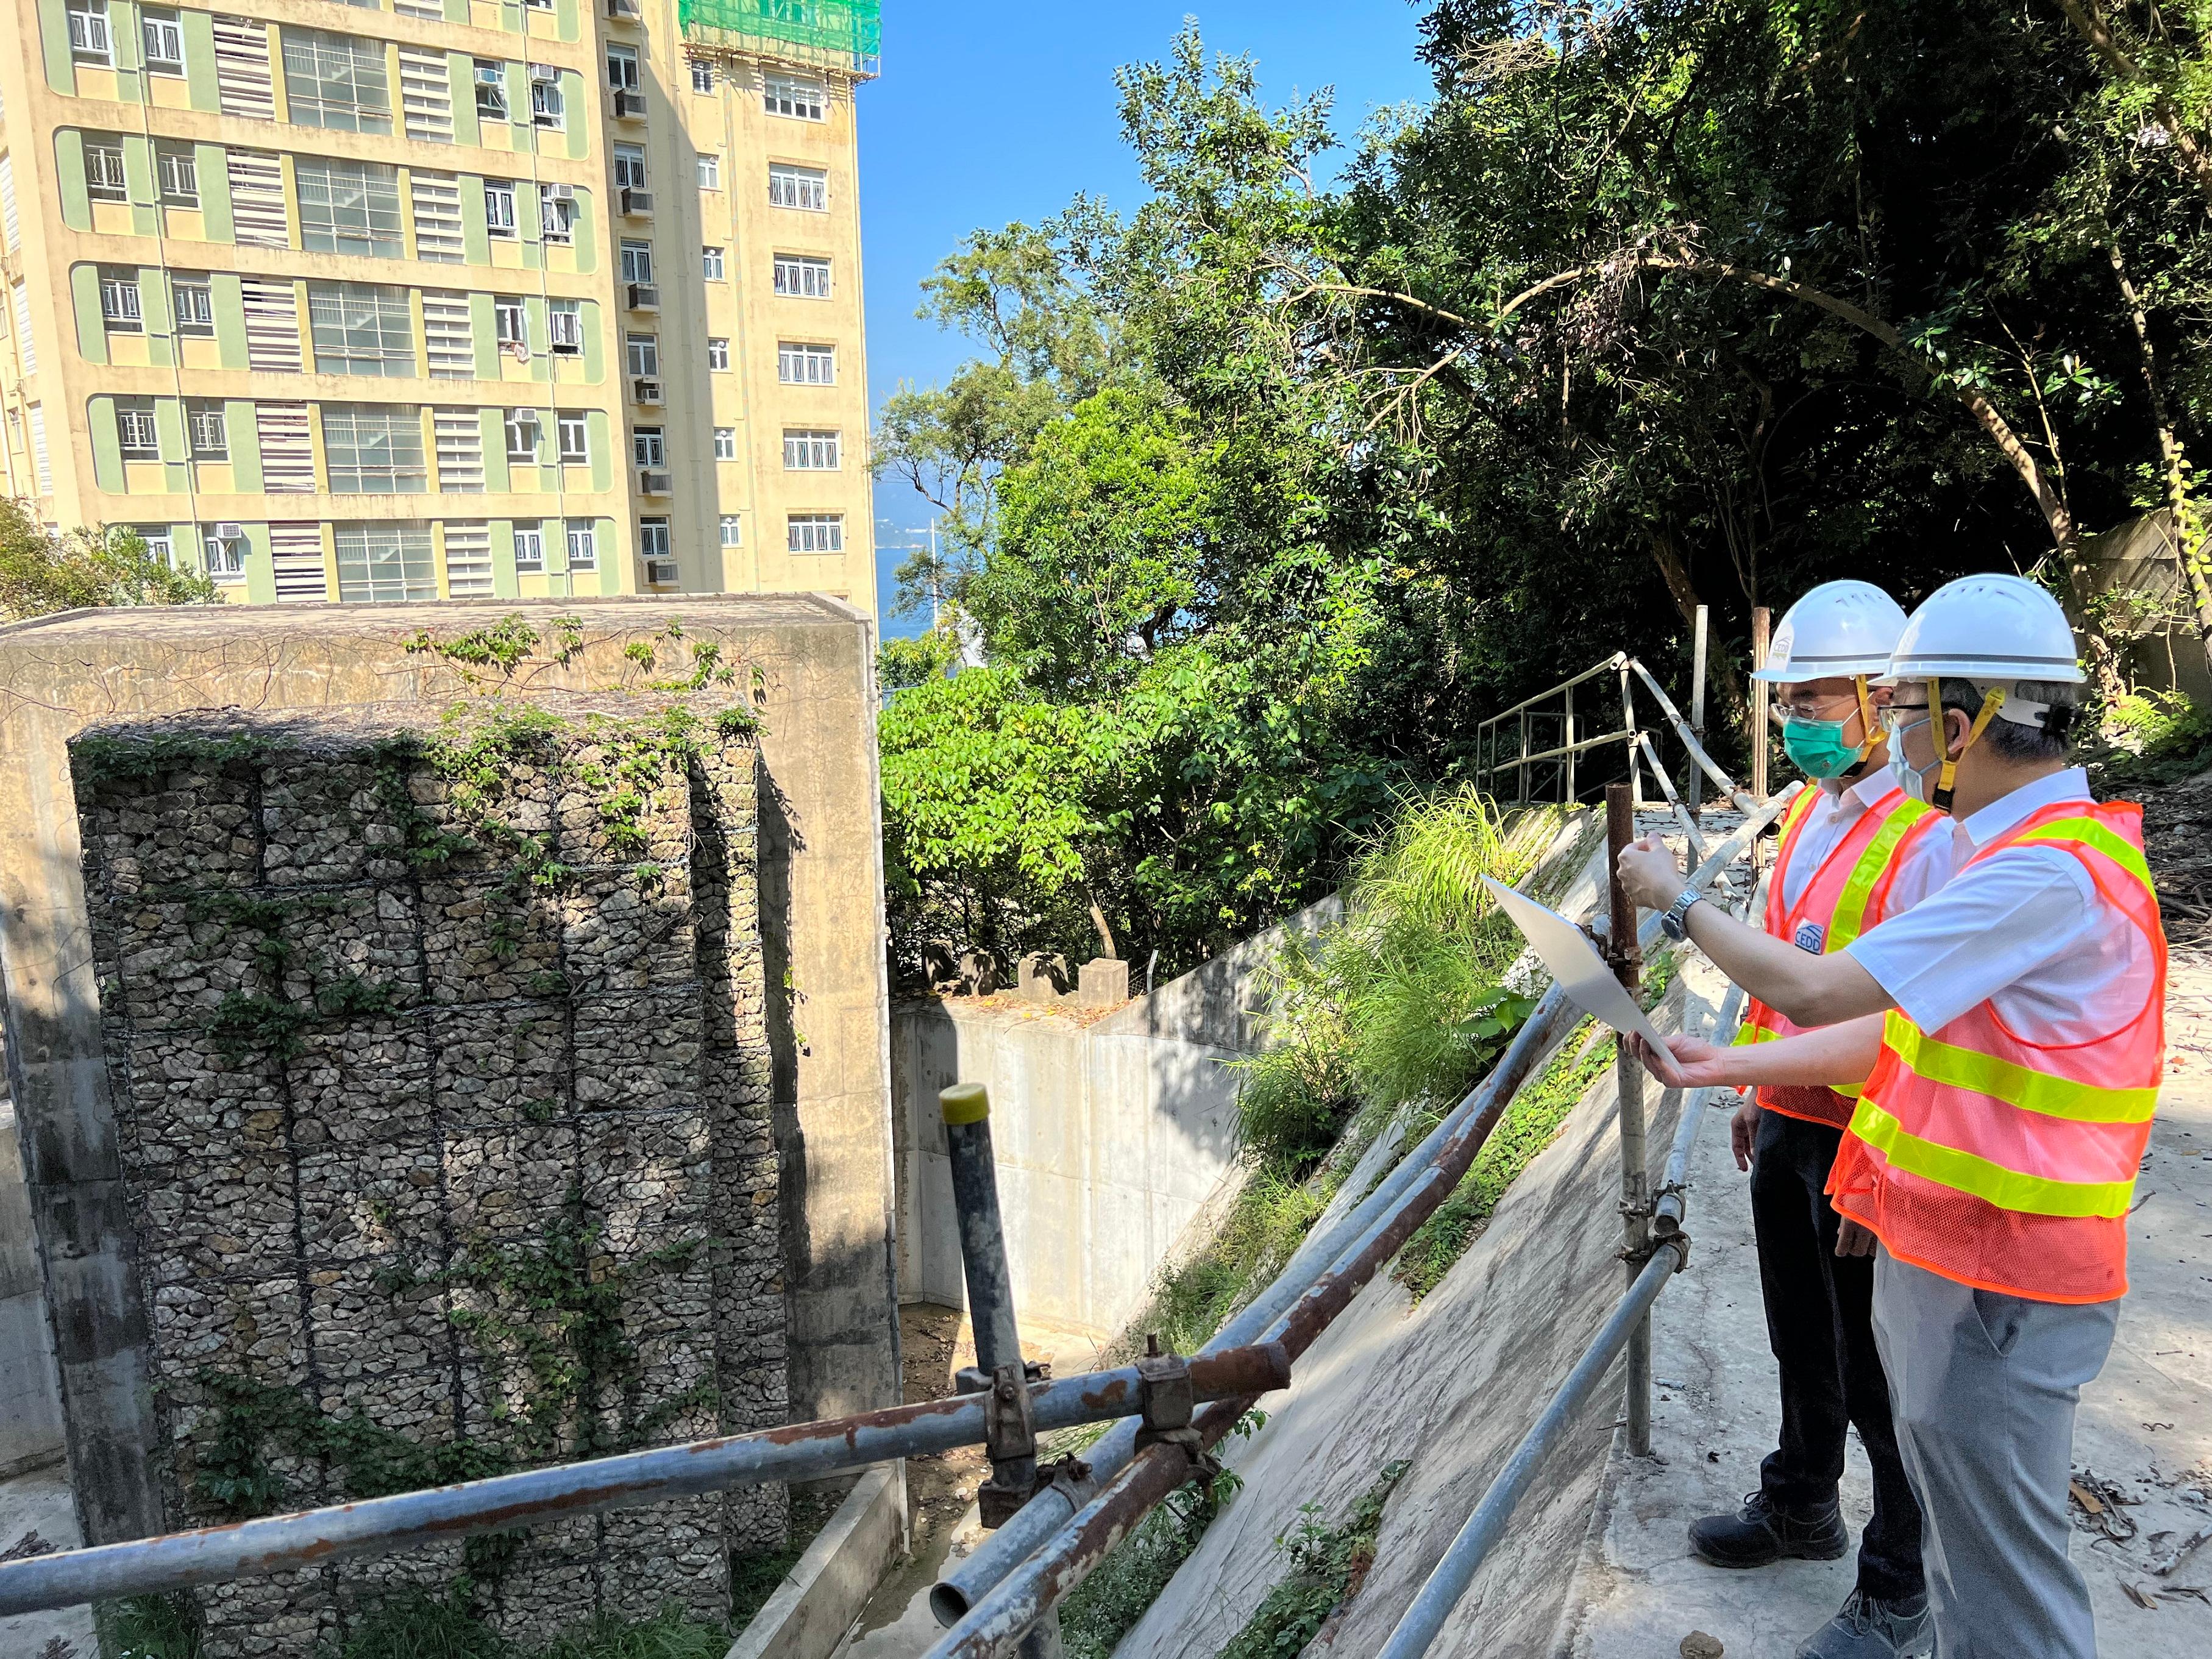 The Director of Civil Engineering and Development, Mr Michael Fong (left), accompanied by the Head of Geotechnical Engineering Office, Dr Raymond Cheung (right), today (August 23) viewed a rigid debris-resisting barrier located behind the Middleton Towers at Pok Fu Lam.